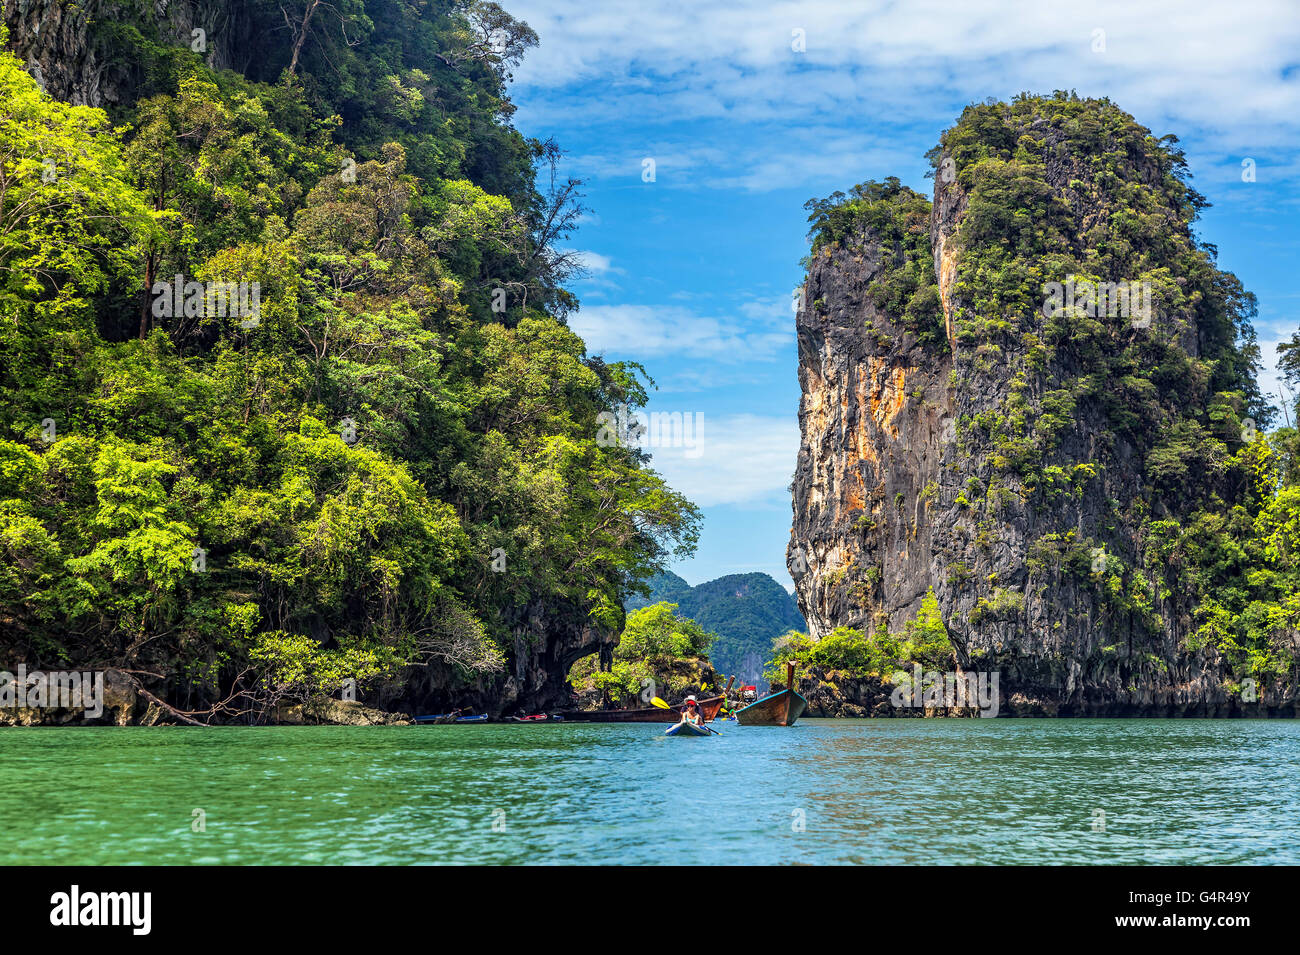 Exotic islands of the Andaman Sea in Thailand Stock Photo